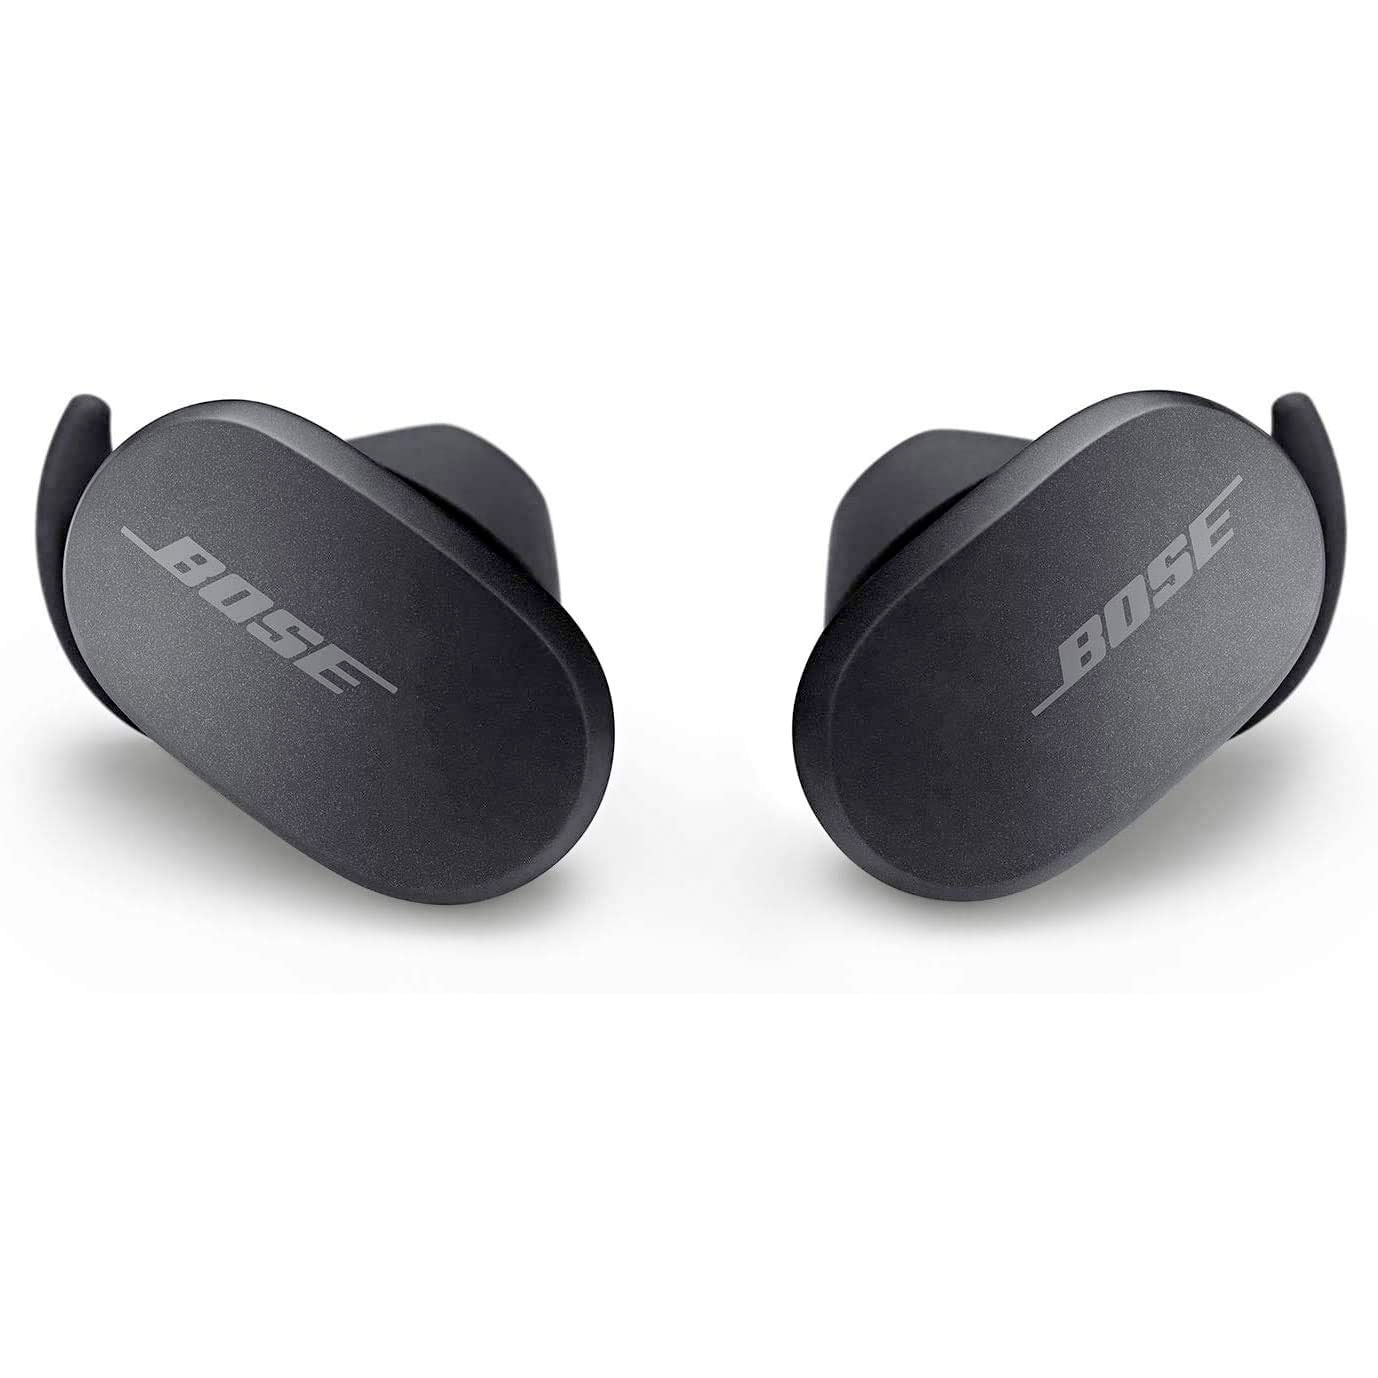 Amazon：Bose QuietComfort Noise Cancelling Earbuds只賣$249